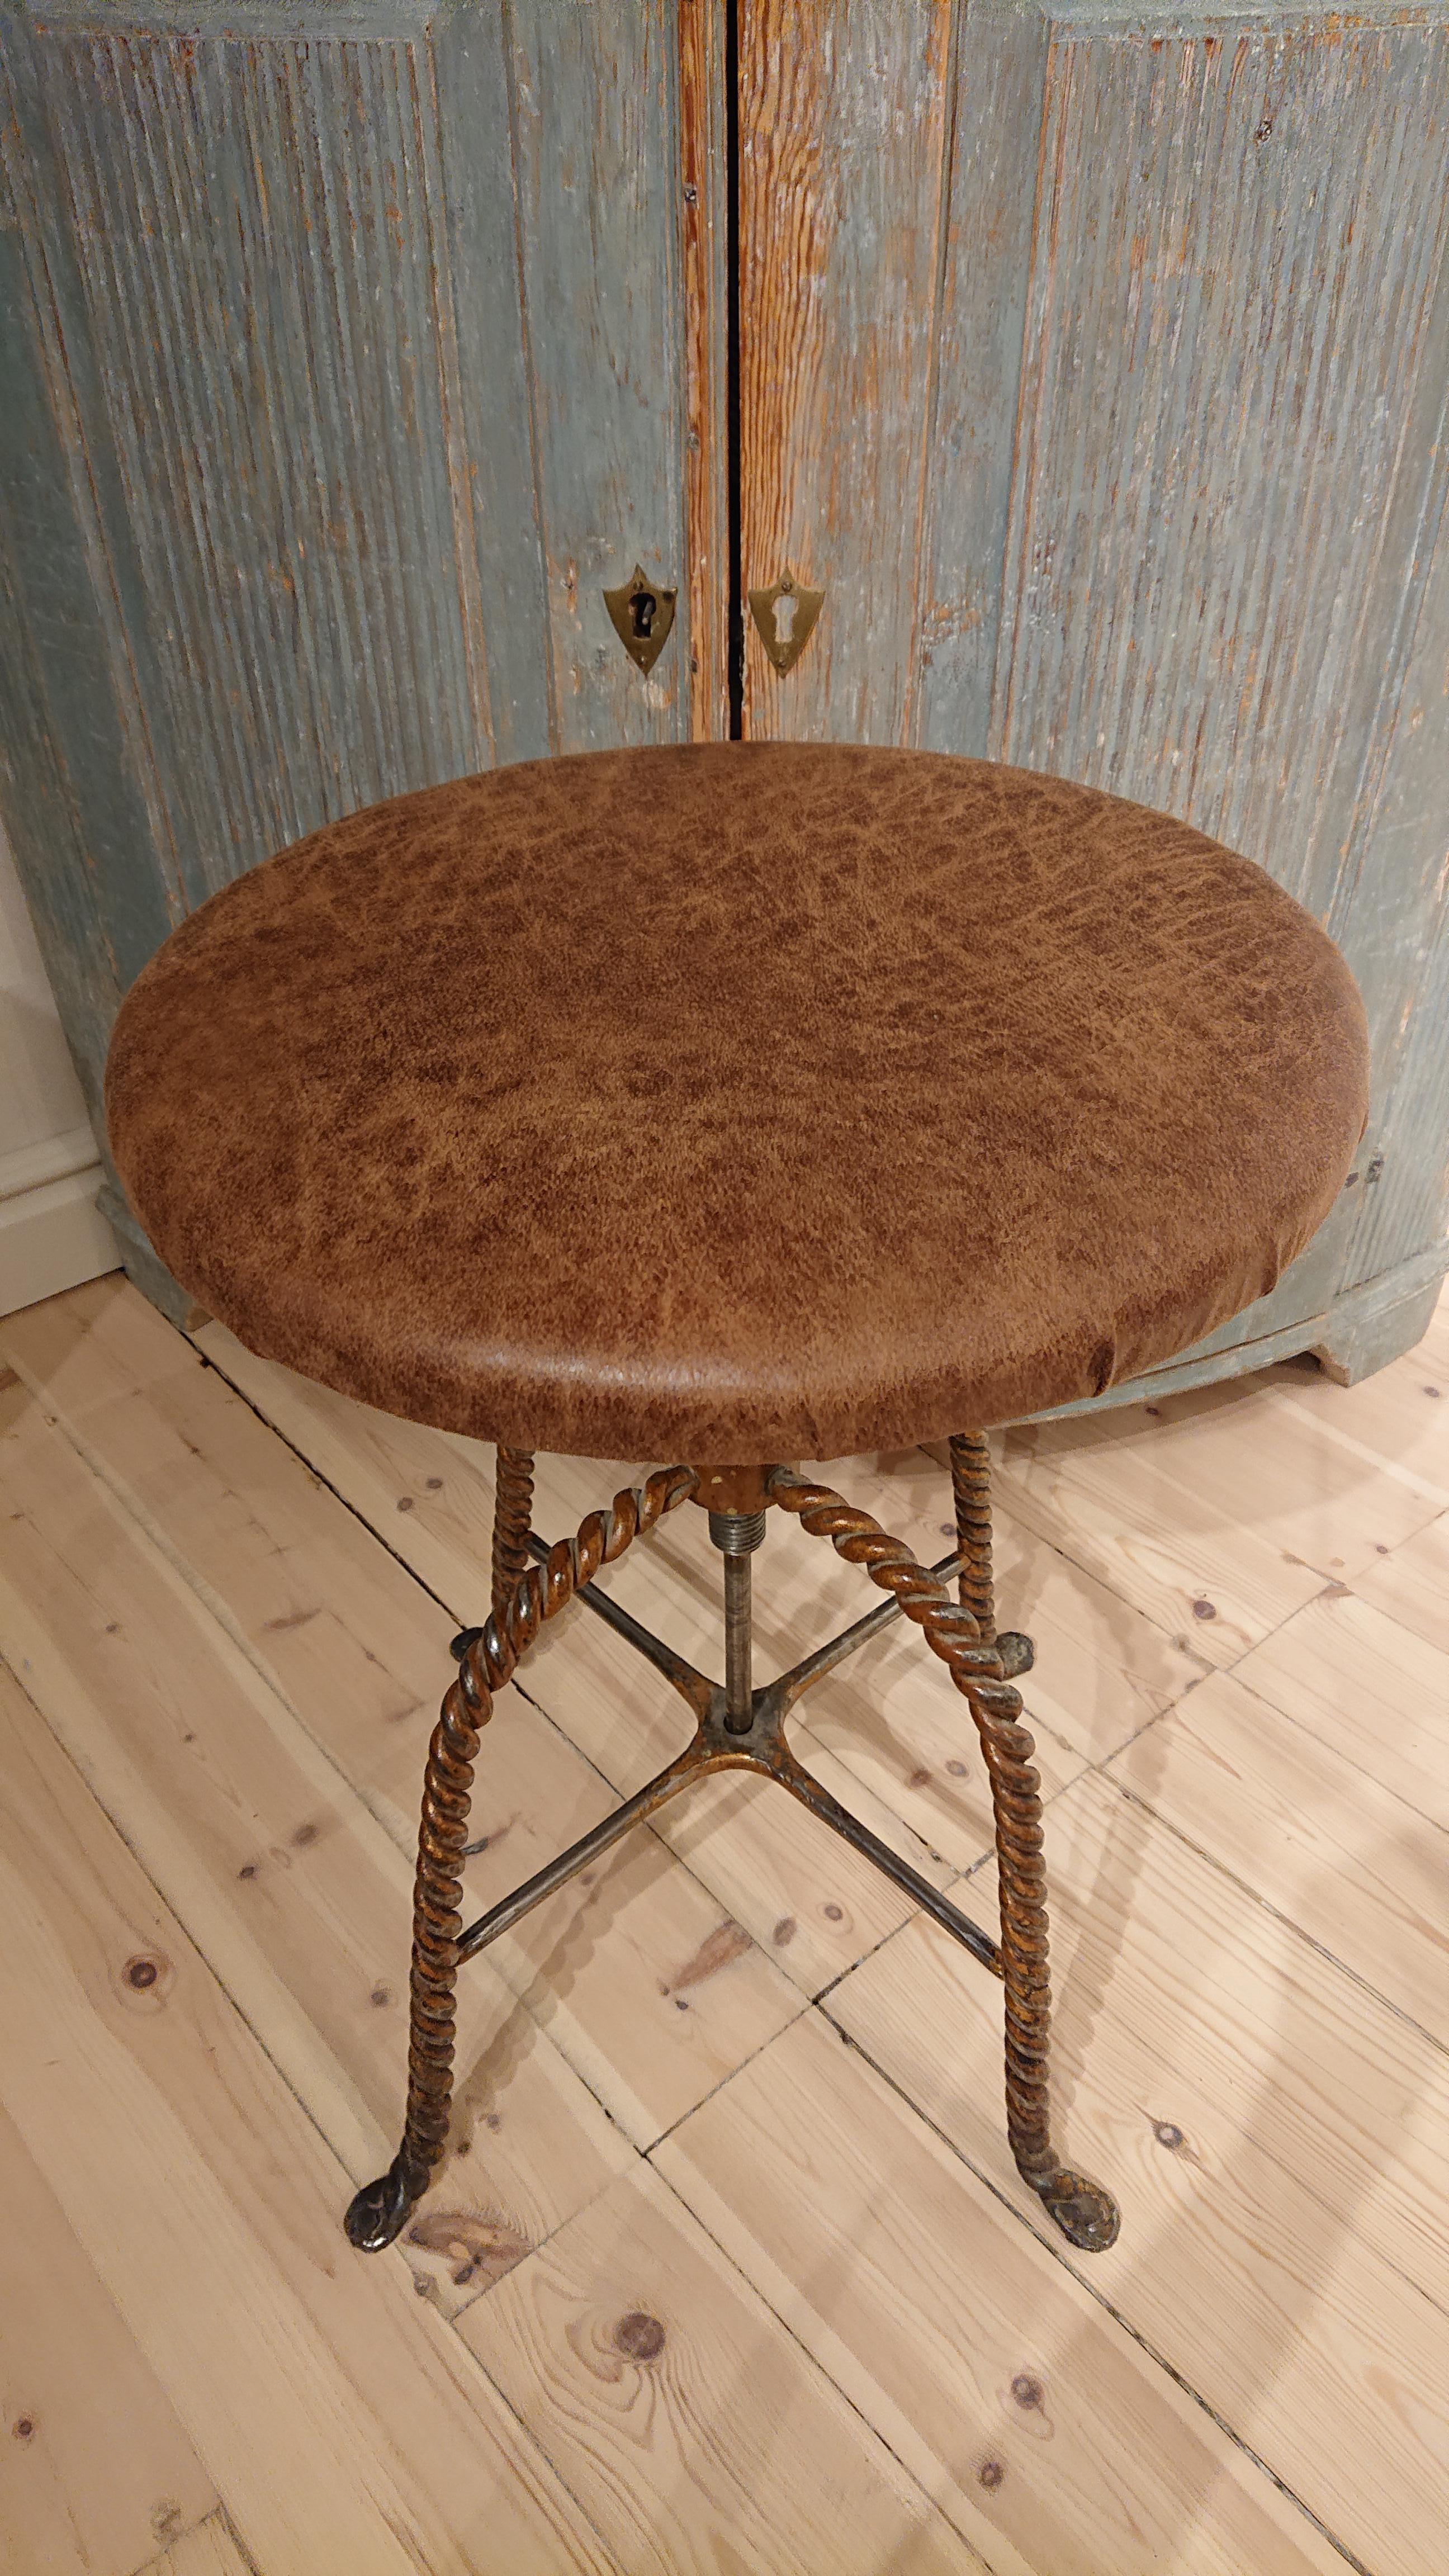 Early 20th century Swedish iron industrial stool.
Solid & useful swivel stool with deliciosly twisted legs in iron.
The stool is raised and lowered.
Measures: Minimum height is 45cm.
Maximum height 60cm.
Upholstered in a leather imitation